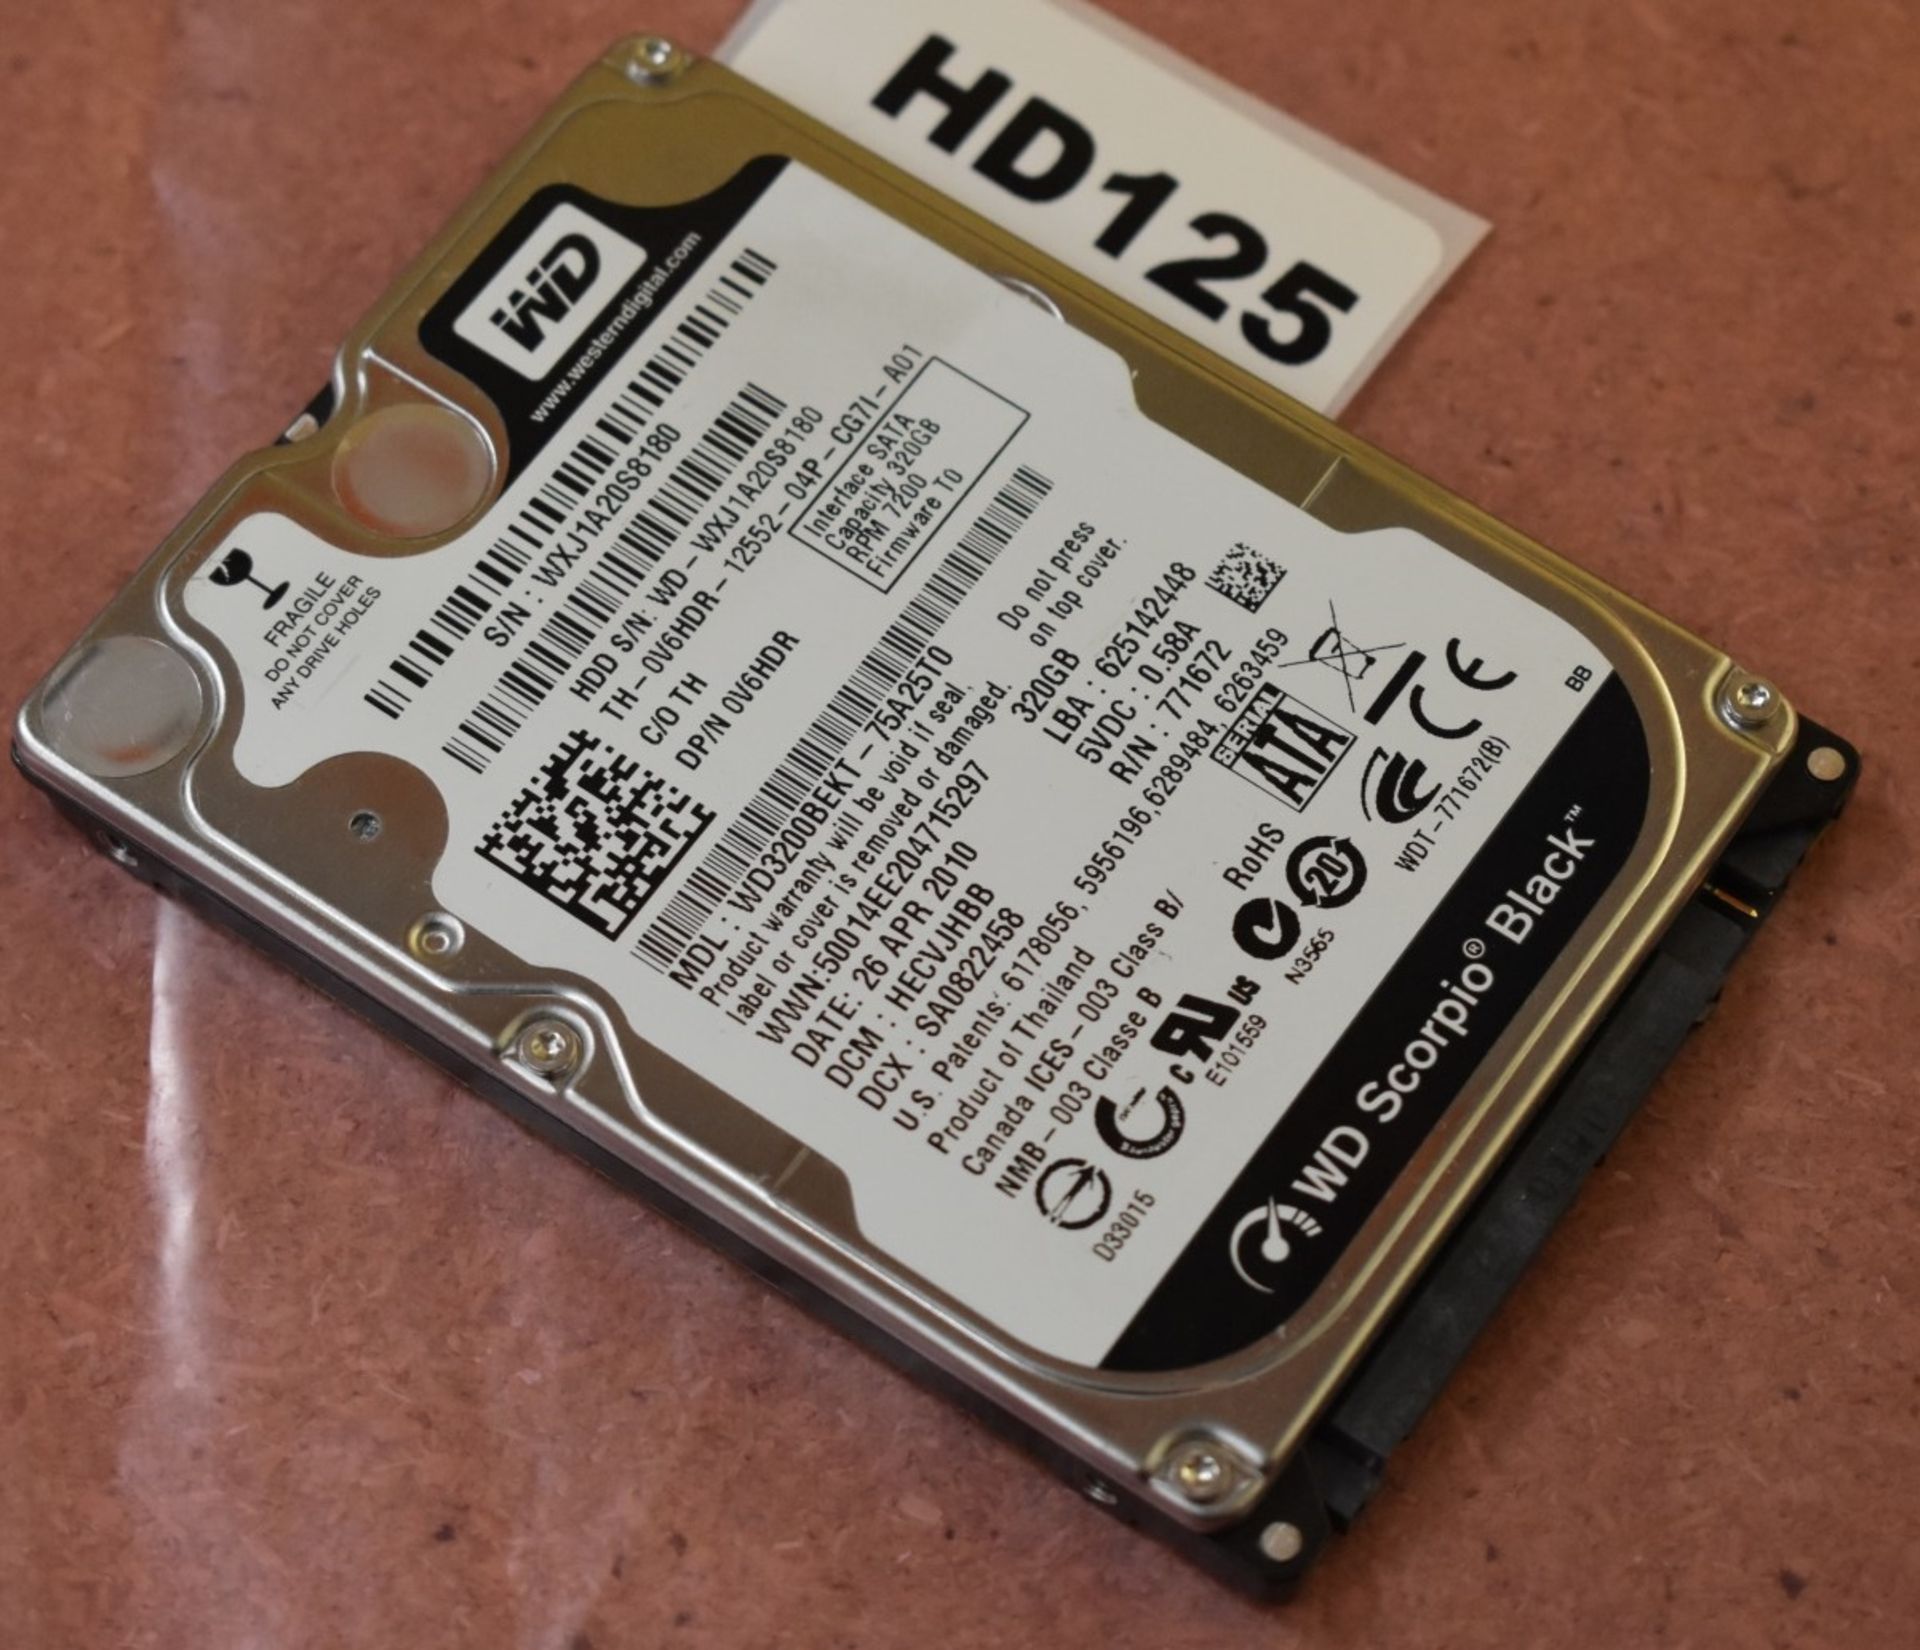 4 x Western Digital 320gb Black 2.5 Inch SATA Hard Drives - Tested and Formatted - HD125/126/127/128 - Image 4 of 4